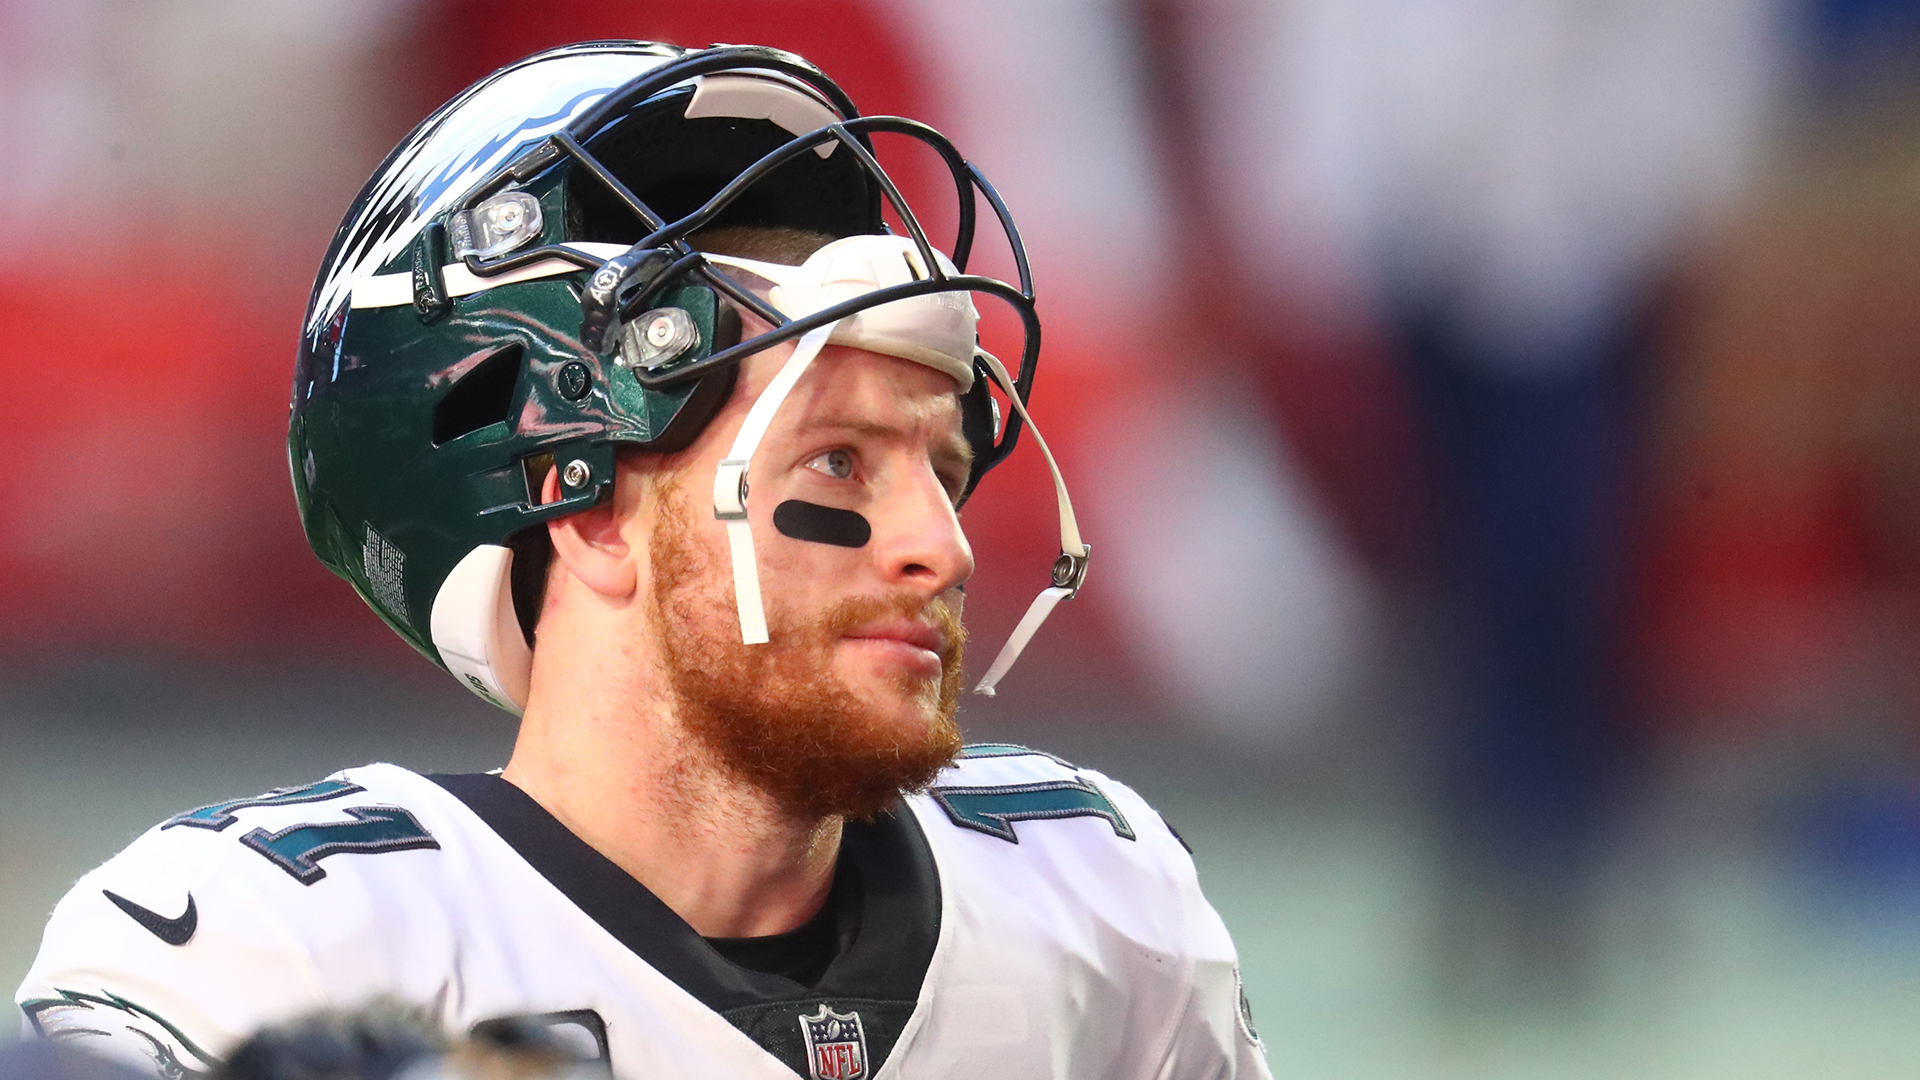 NFL rumors: insiders don’t seem to agree with Carson Wentz’s future as an eagle